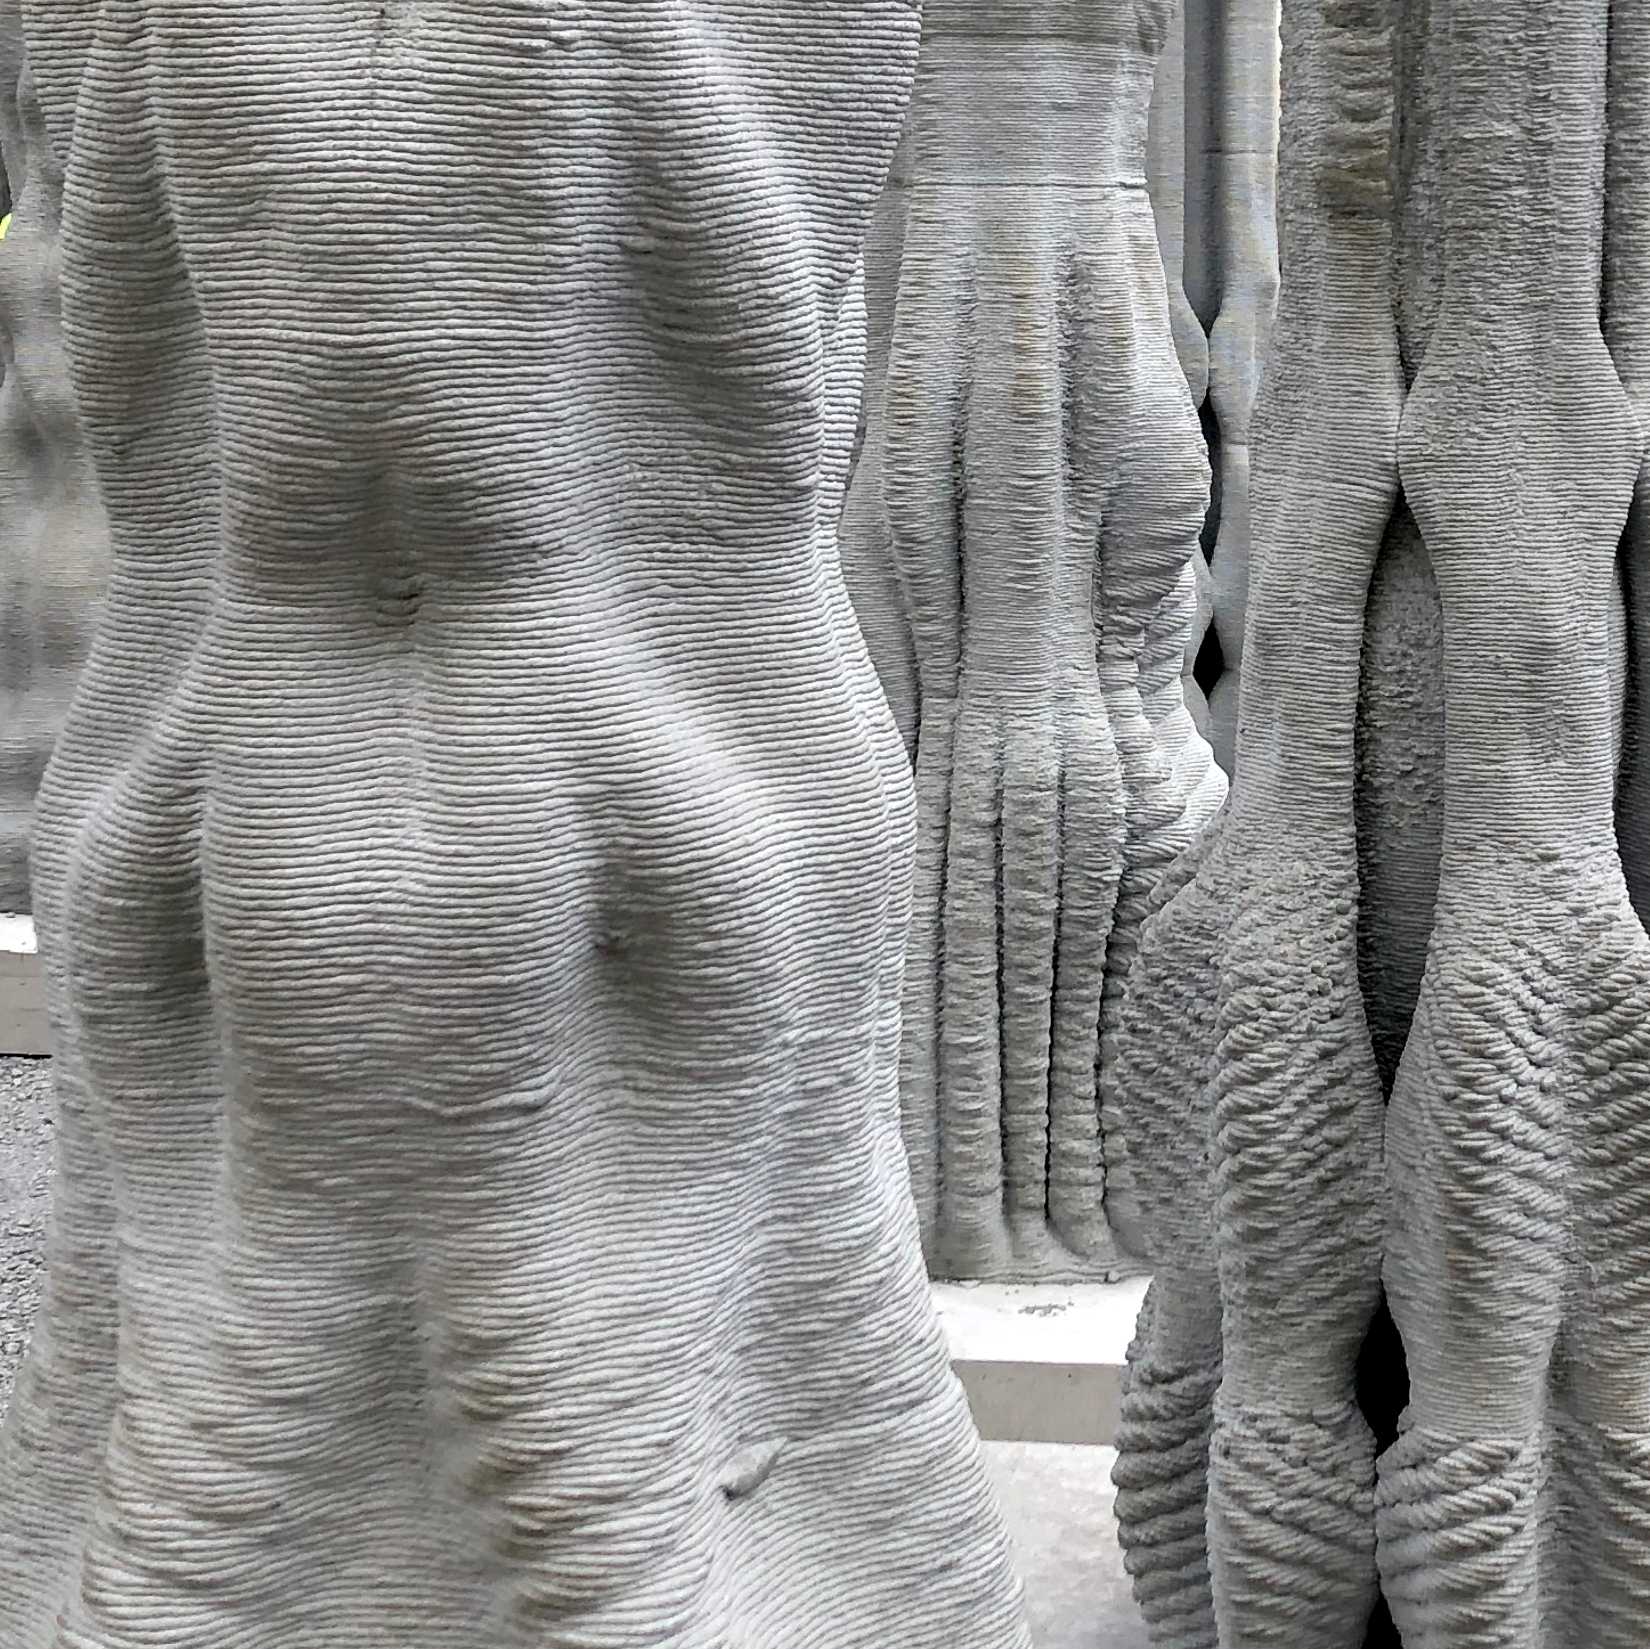 Details and surface texture of 3D printed con-crete. © ETH Zurich / Angela Yoo, Digital Building Technologies